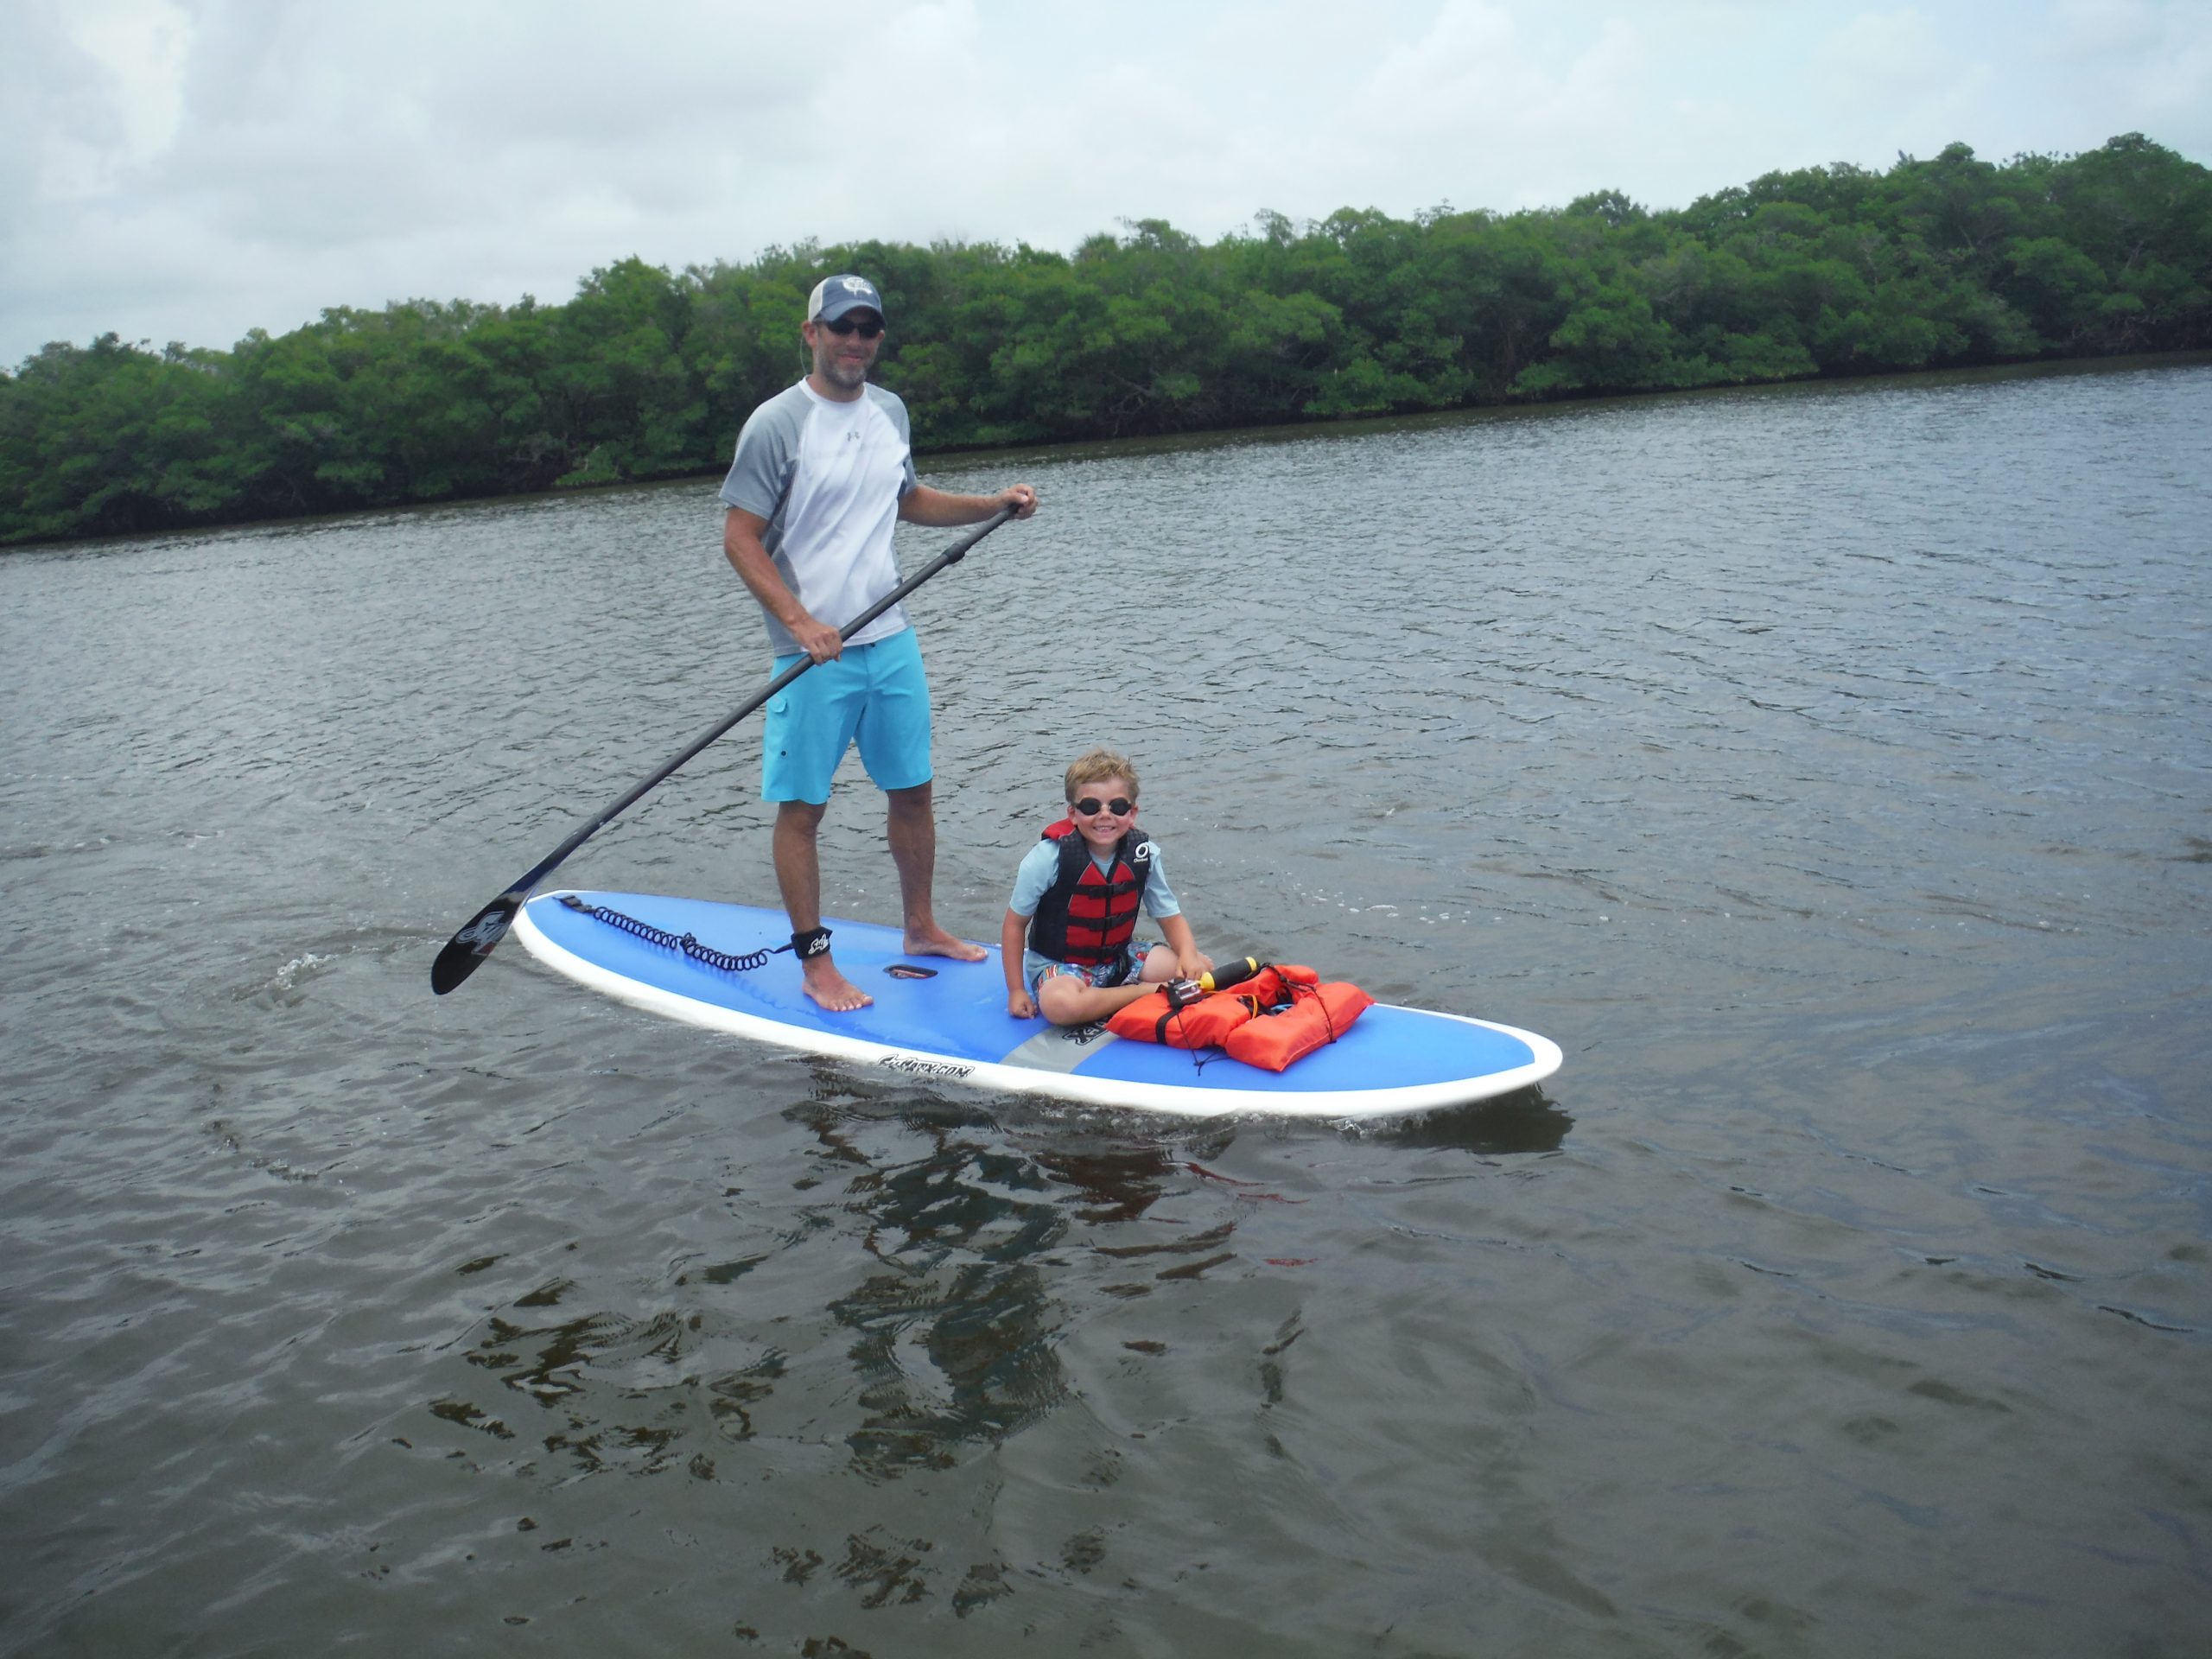 Child riding in front of paddle board